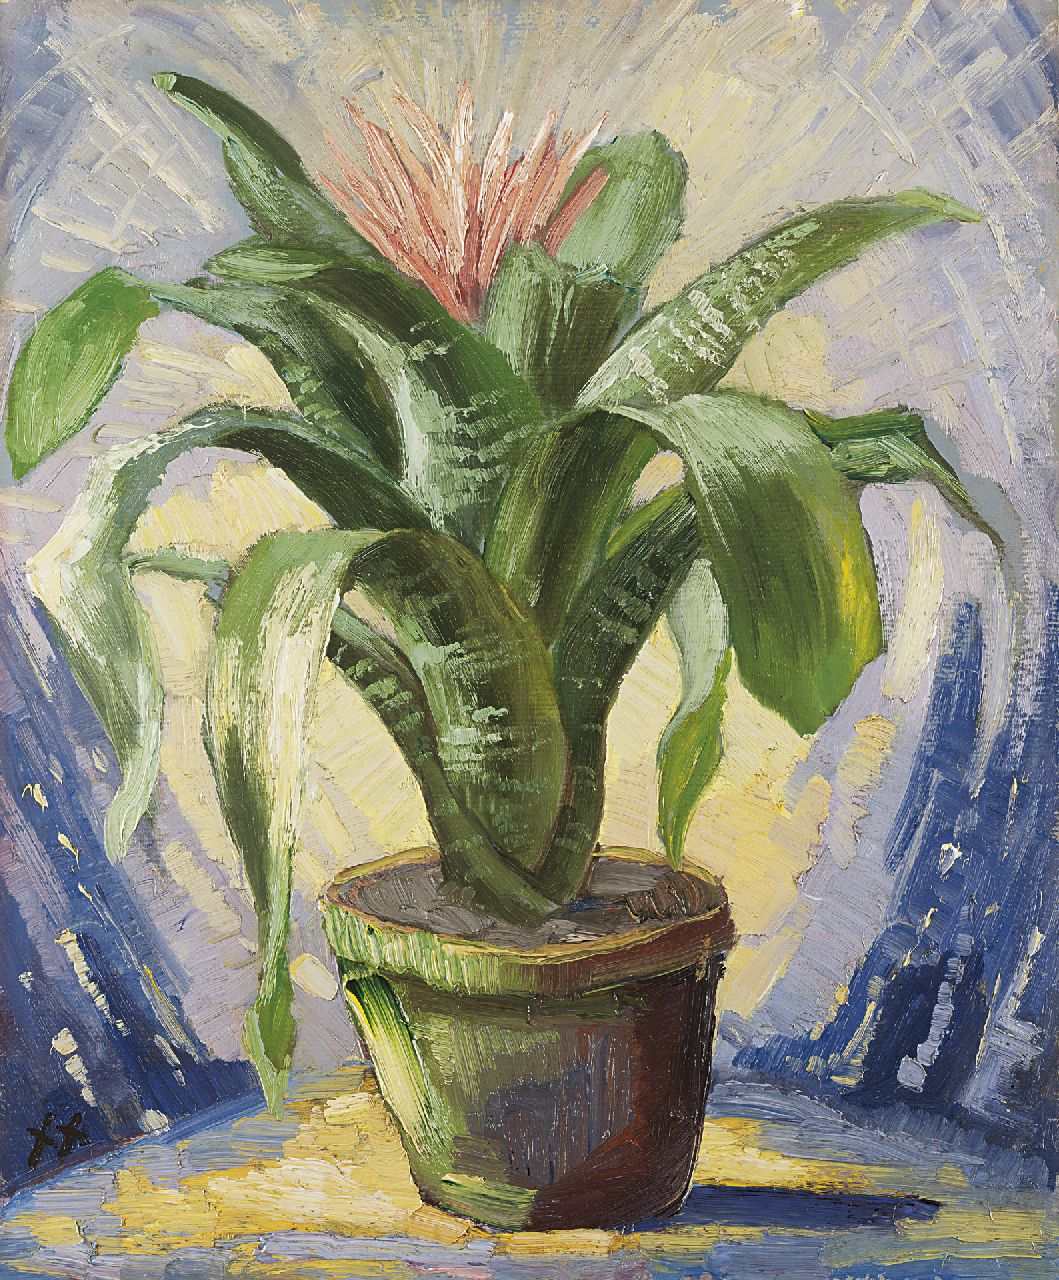 Kruysen J.  | Johannes 'Jan' Kruysen | Paintings offered for sale | Bromelia in an earthenware pot, oil on painter's board 45.8 x 37.8 cm, signed l.l. with monogram